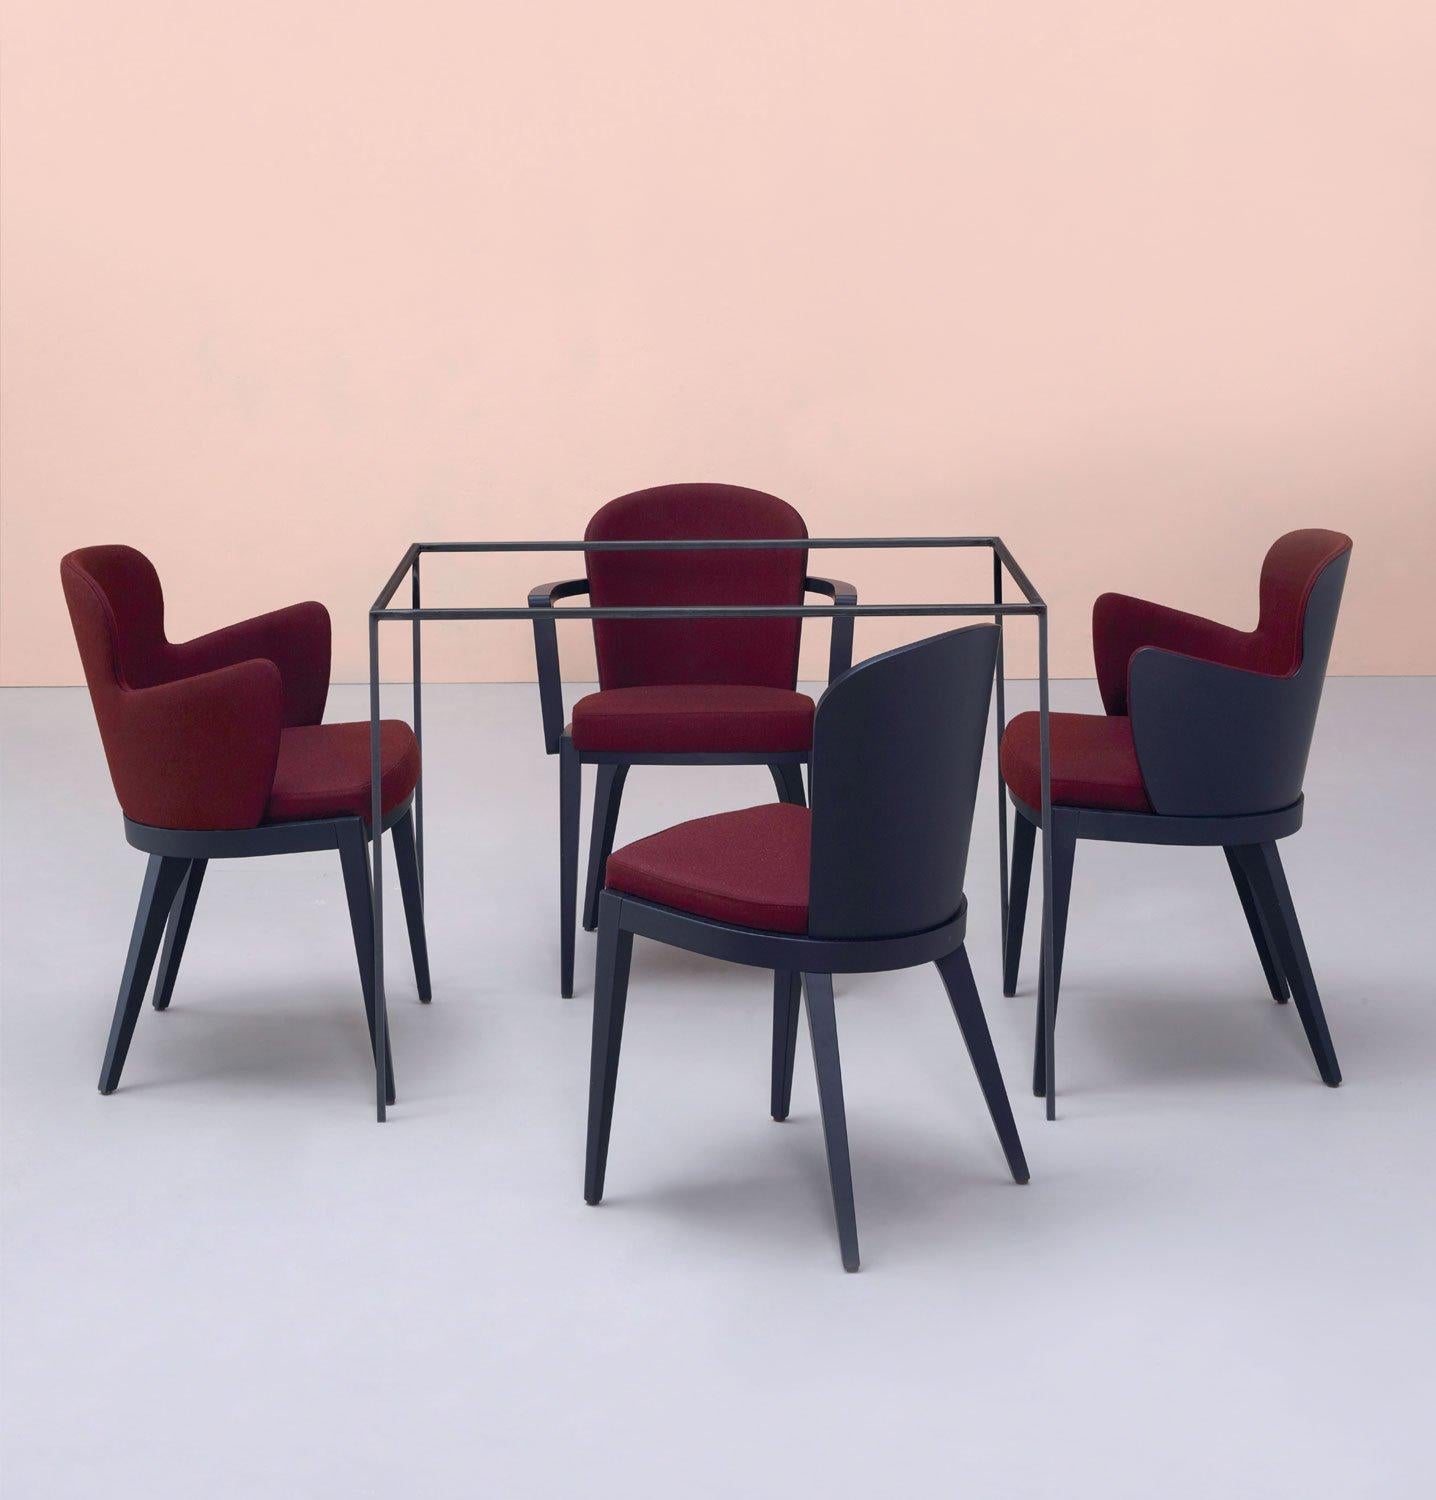 Timeless design in combination with handmade couture techniques. The Italian dining chairs features curved wooden upholstered back for greater support and comfort. offered in wengè finsihed frame and woven wine fabric that is resistant to stains and